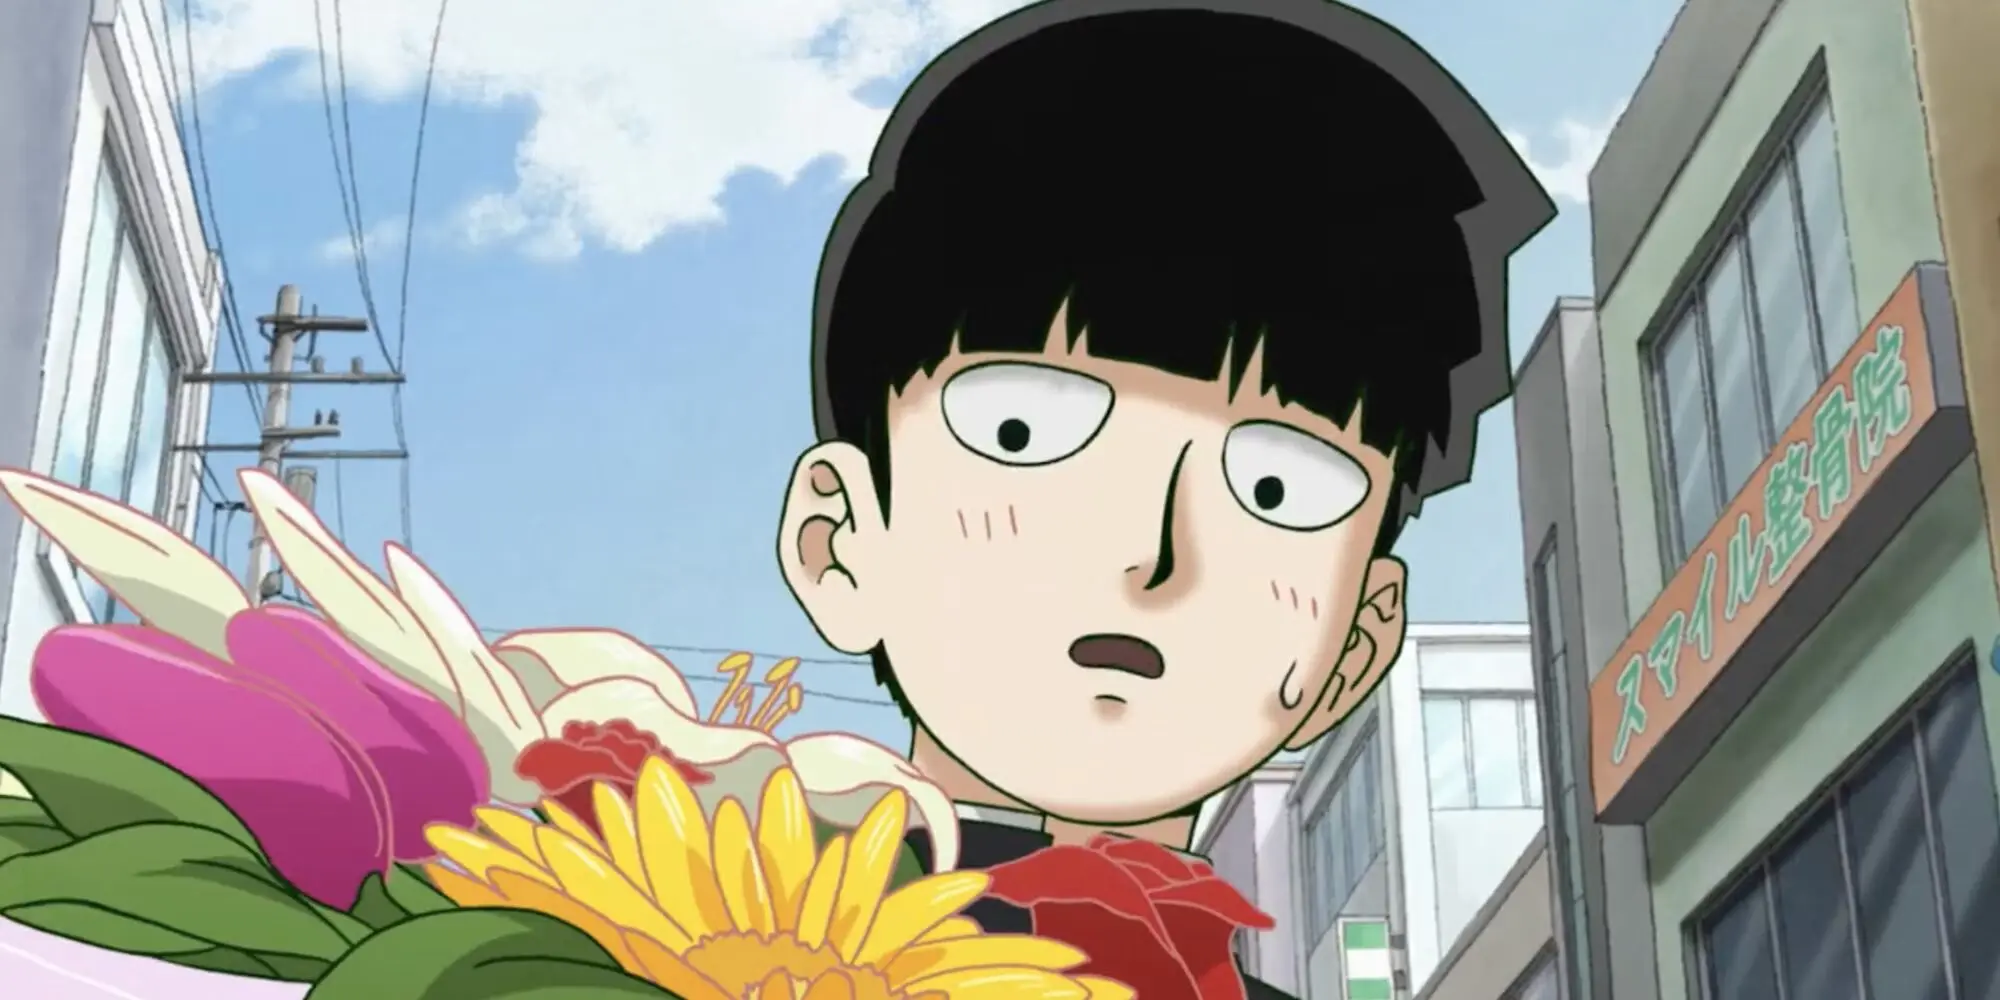 Mob Psycho 100 III Episode 7 Review - The Aftermath